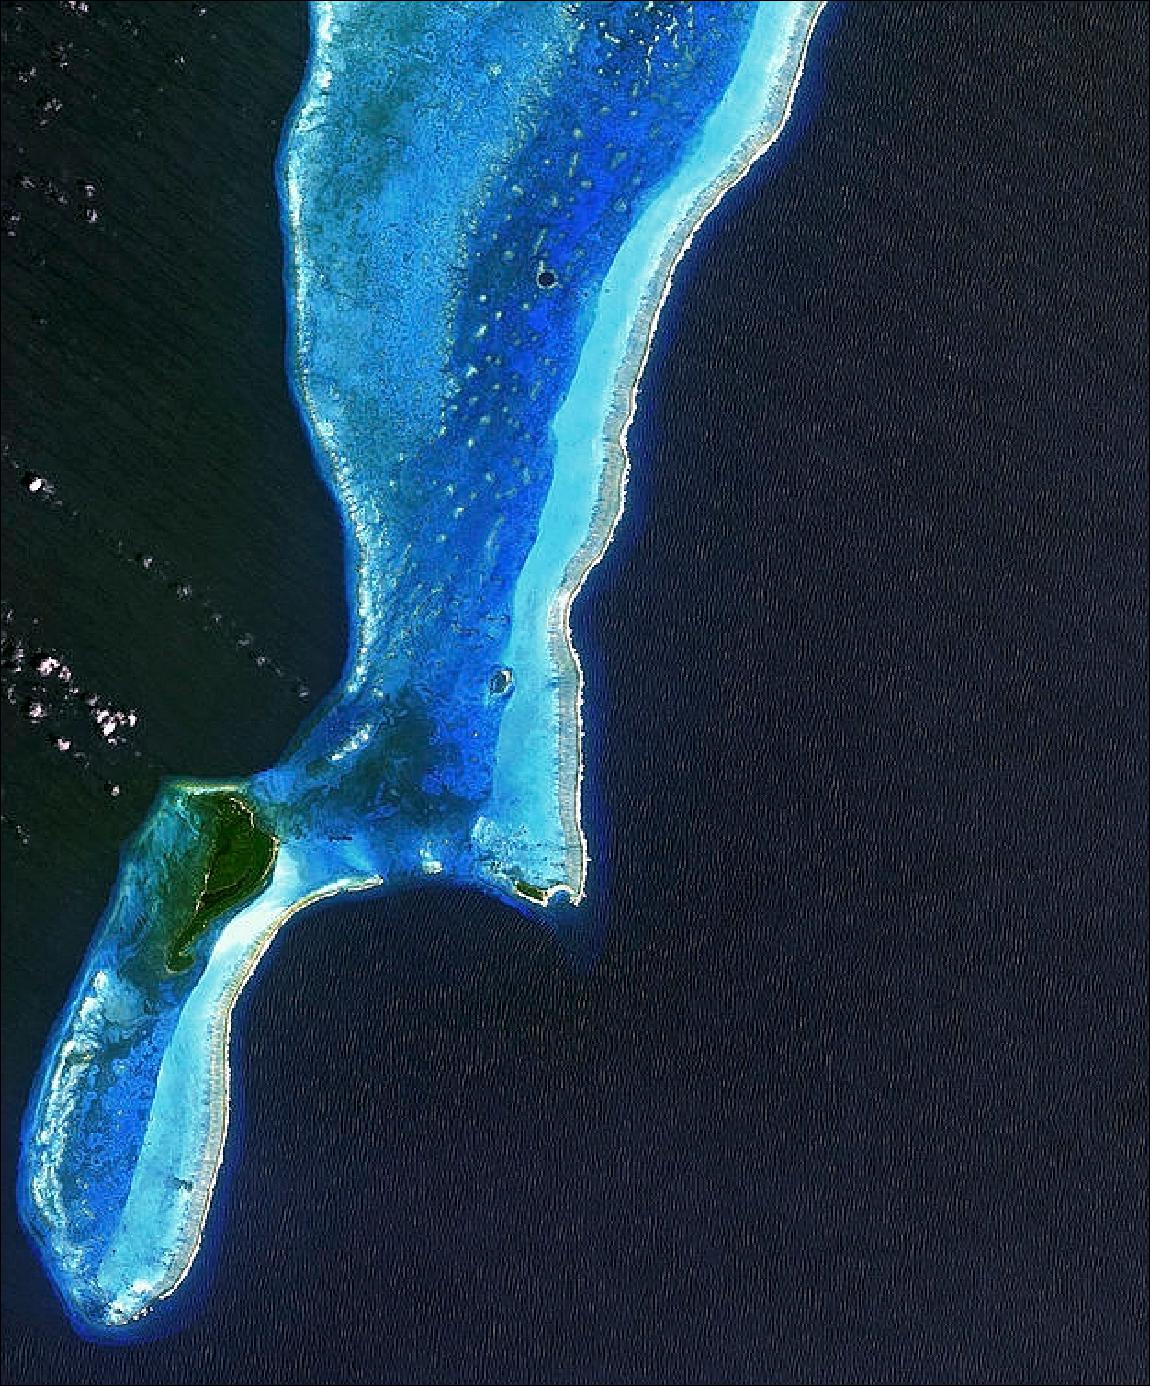 Figure 25: The Lighthouse Atoll in the Belize Barrier Reef is featured in this image acquired on 29 March 2011 by Japan’s ALOS satellite (image credit: JAXA, ESA)